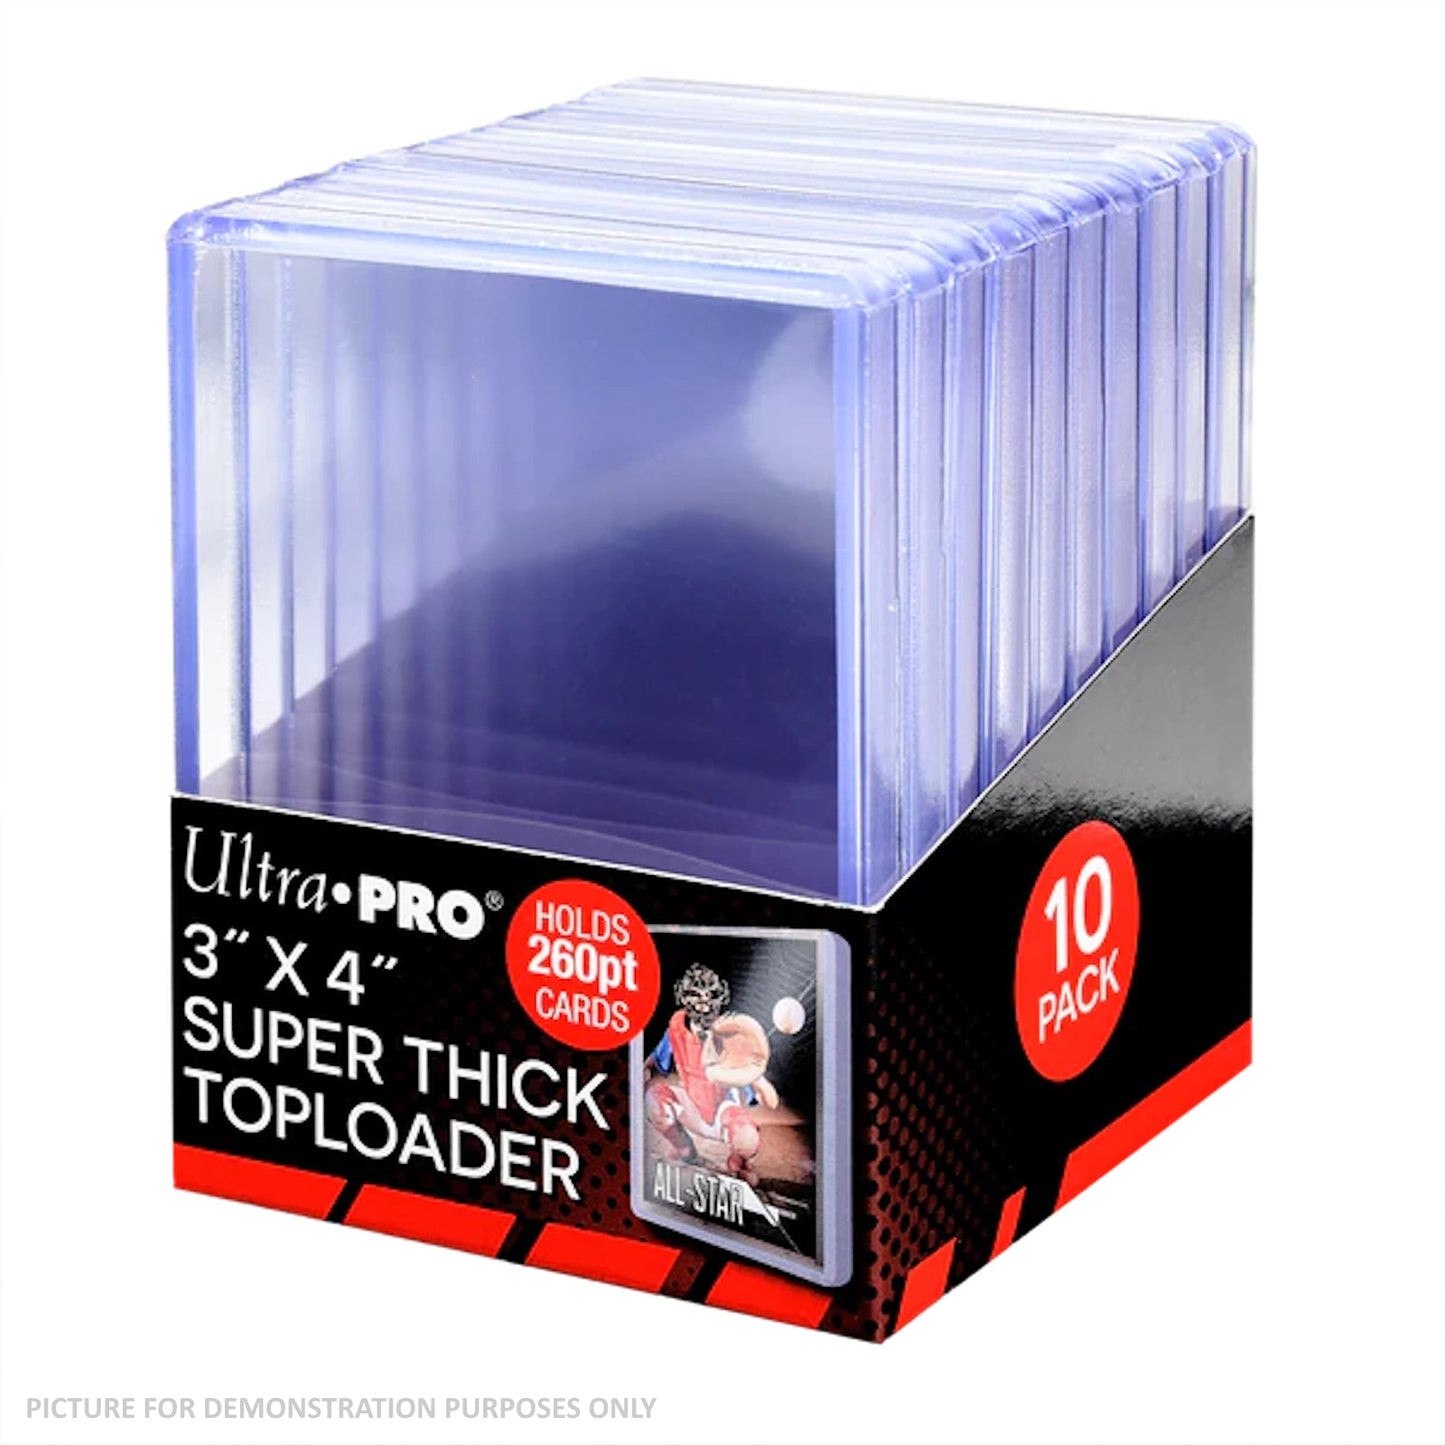 Ultra Pro 260pt CLEAR Toploaders - PACK OF 10